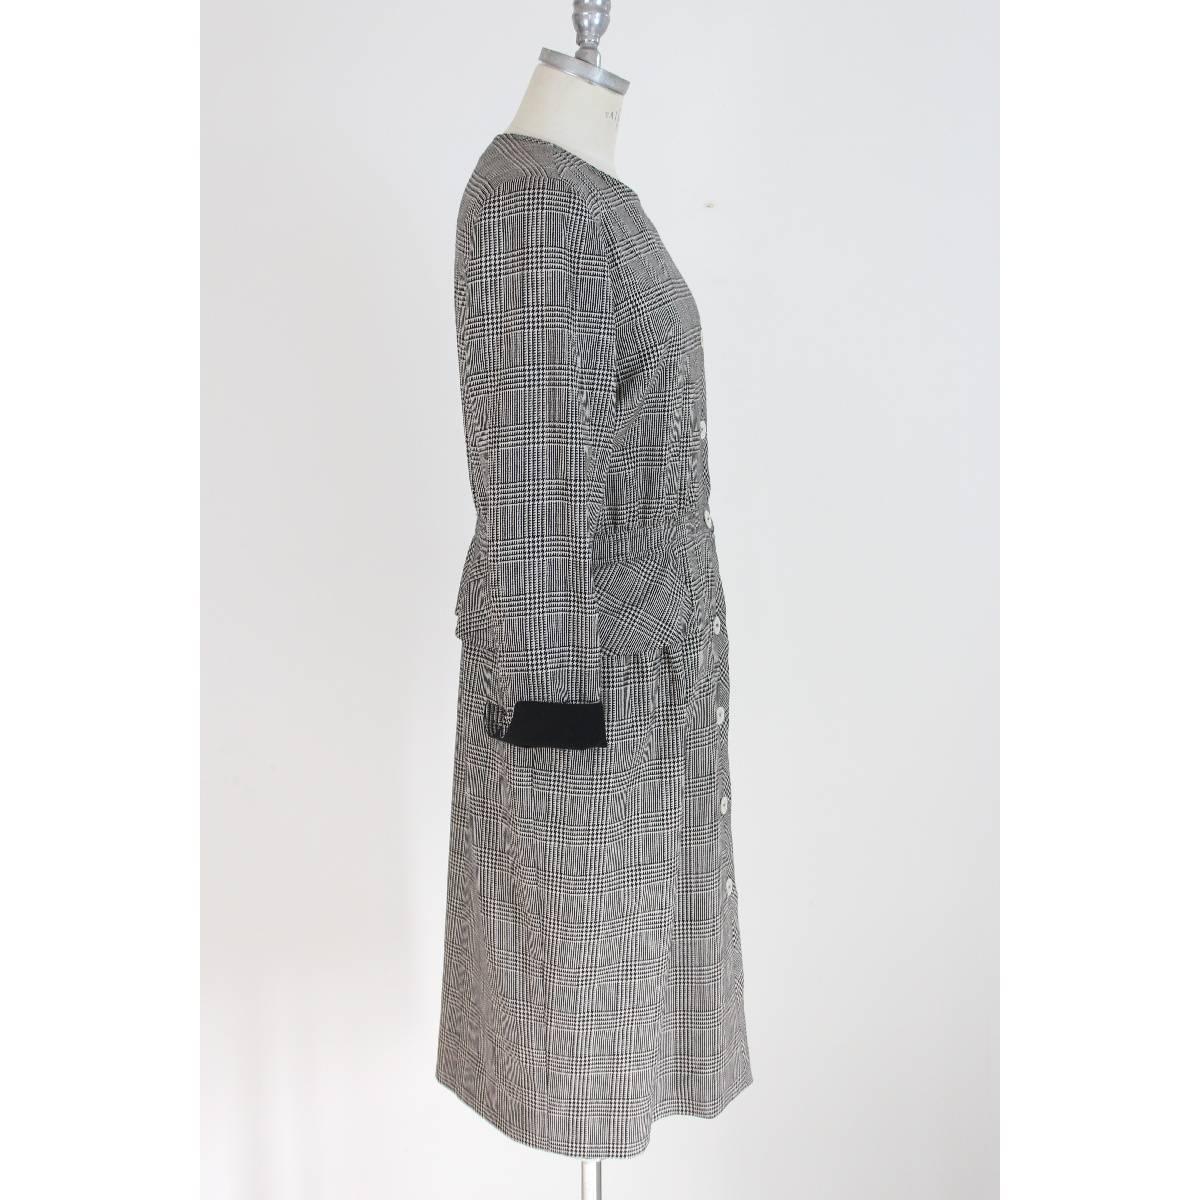 Gray Valentino vintage wool check dress black and white size 48 mother of pearl butto